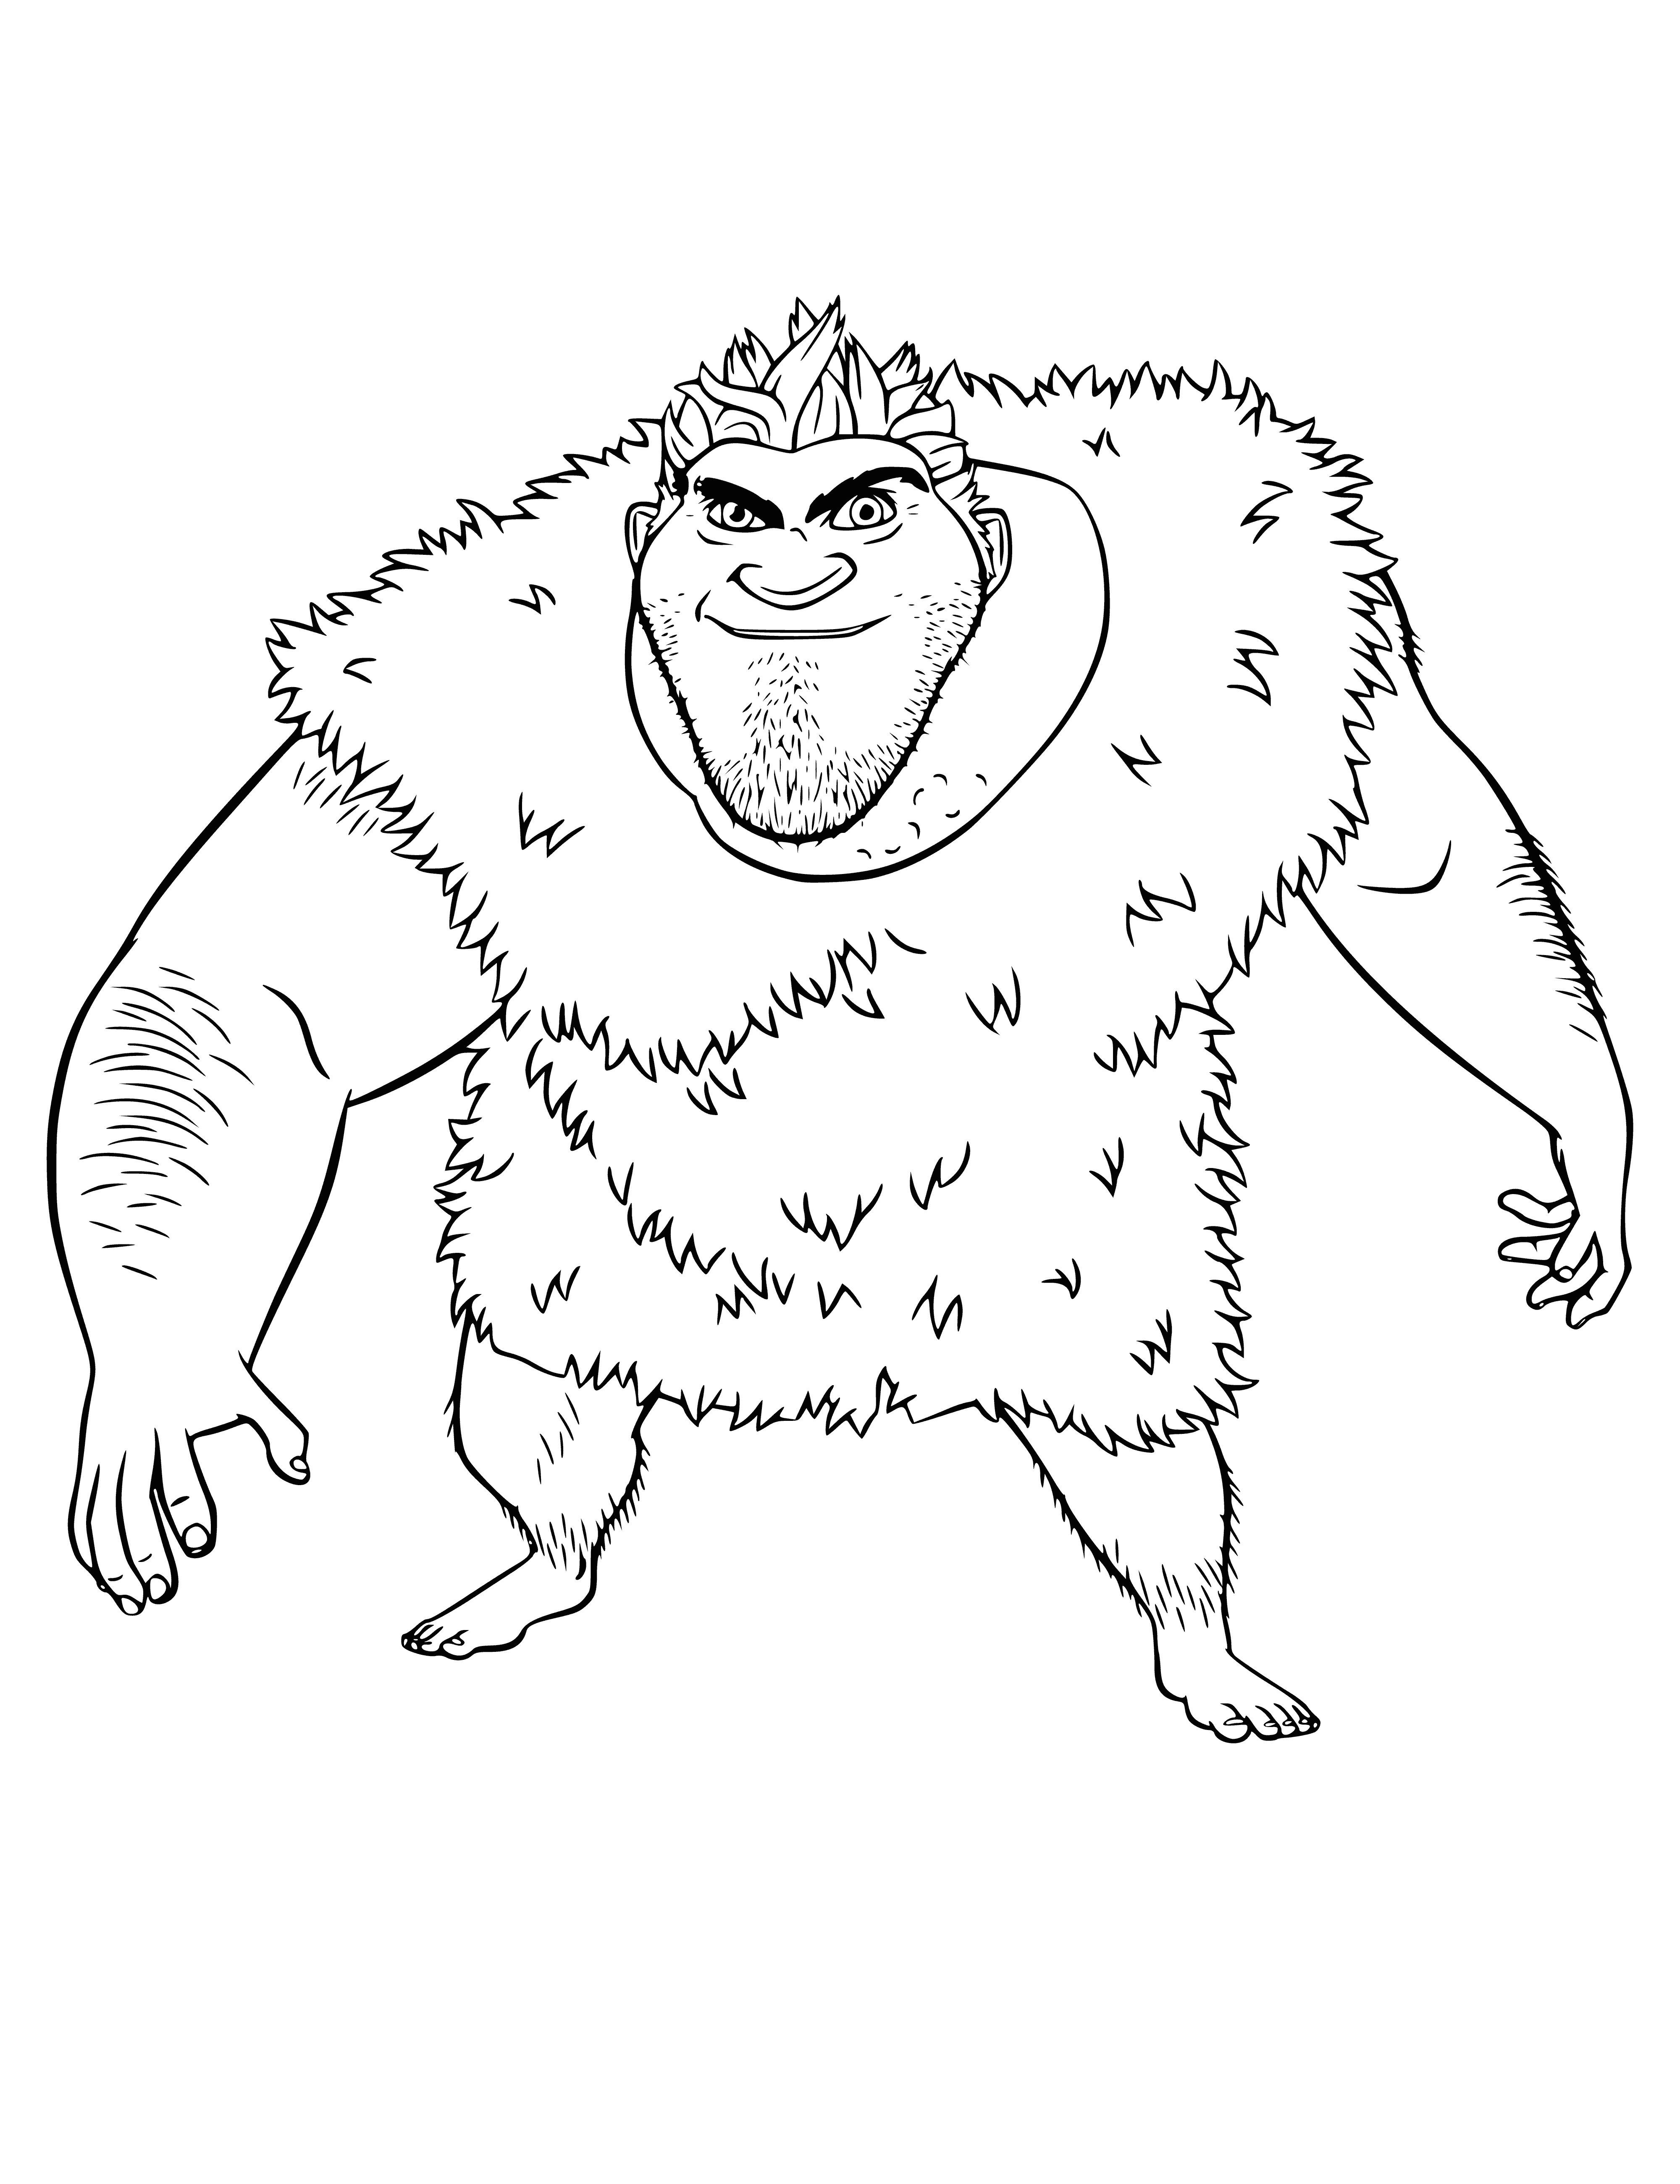 coloring page: Grug: large, stocky caveman with bushy beard & animal skins, carrying a large club. Looks primitive. #caveman